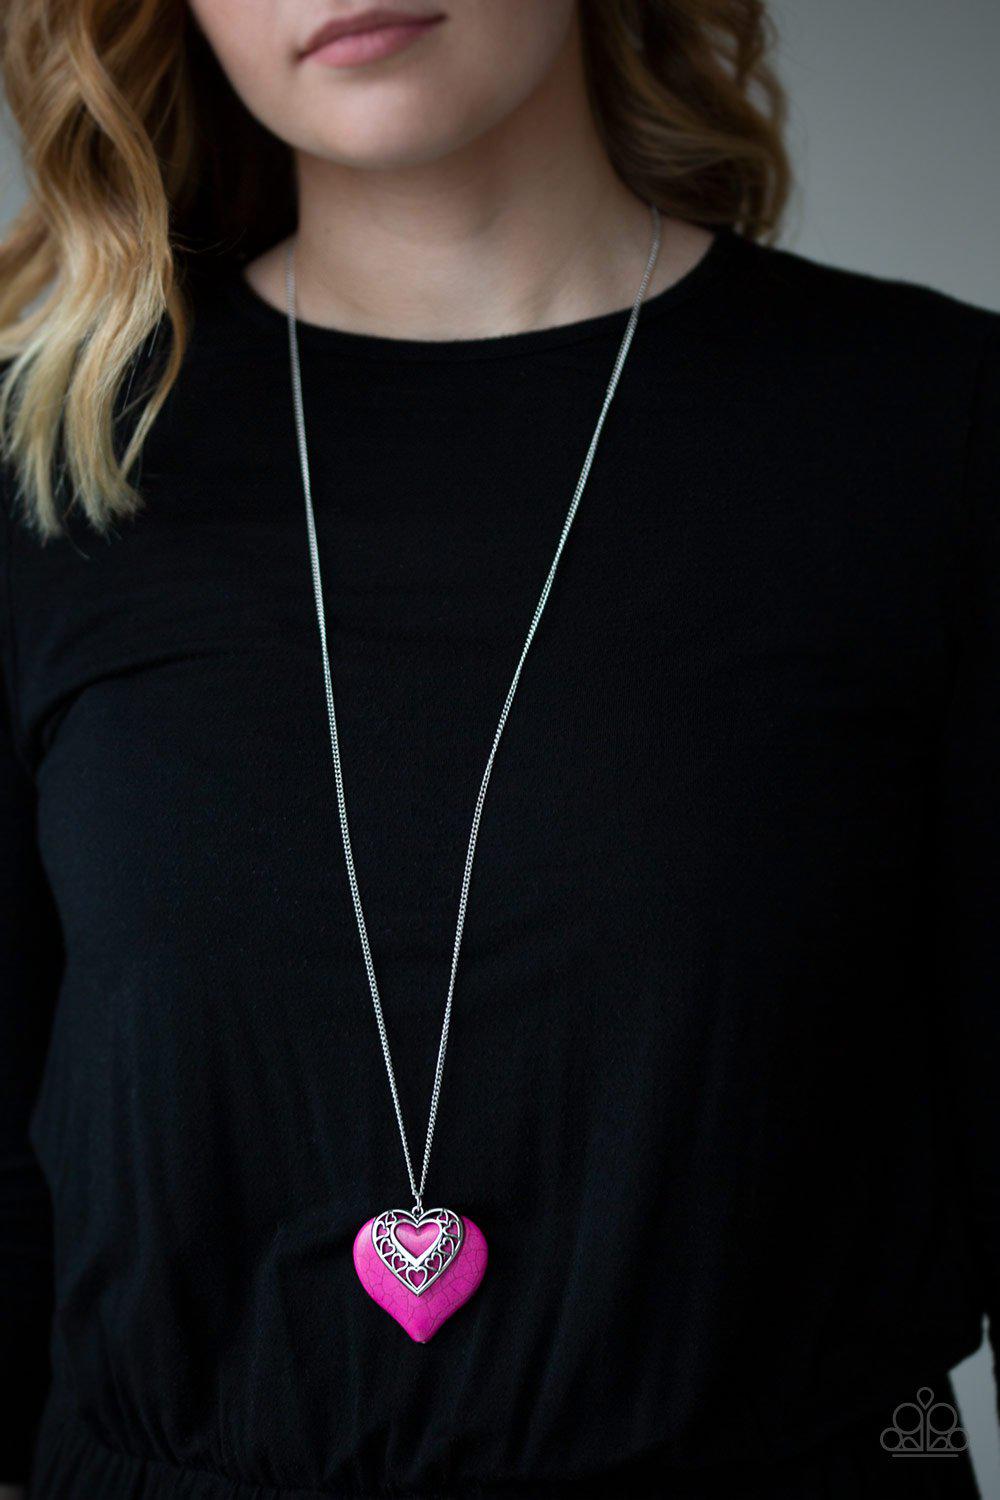 Southern Heart Pink Stone Necklace - Paparazzi Accessories-CarasShop.com - $5 Jewelry by Cara Jewels